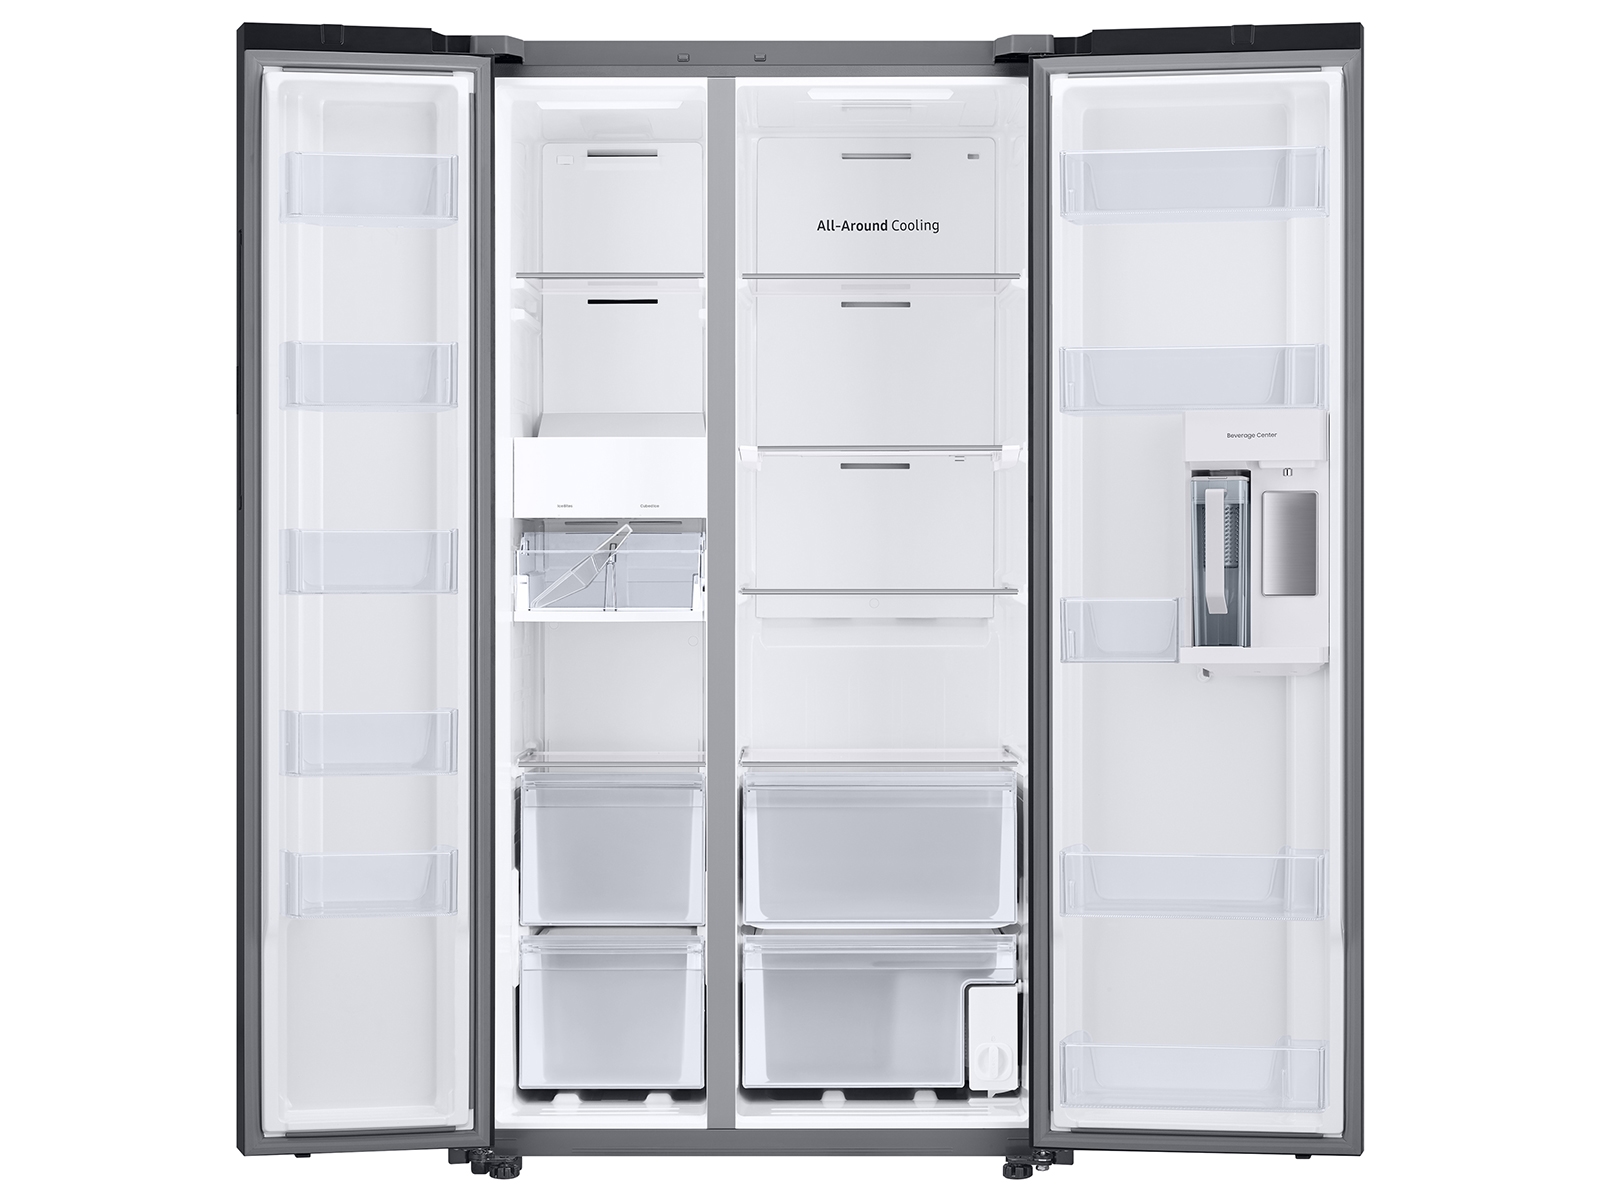 US 28 with | cu. in Center Beverage Side-by-side Samsung Bespoke Refrigerator ft. Glass White